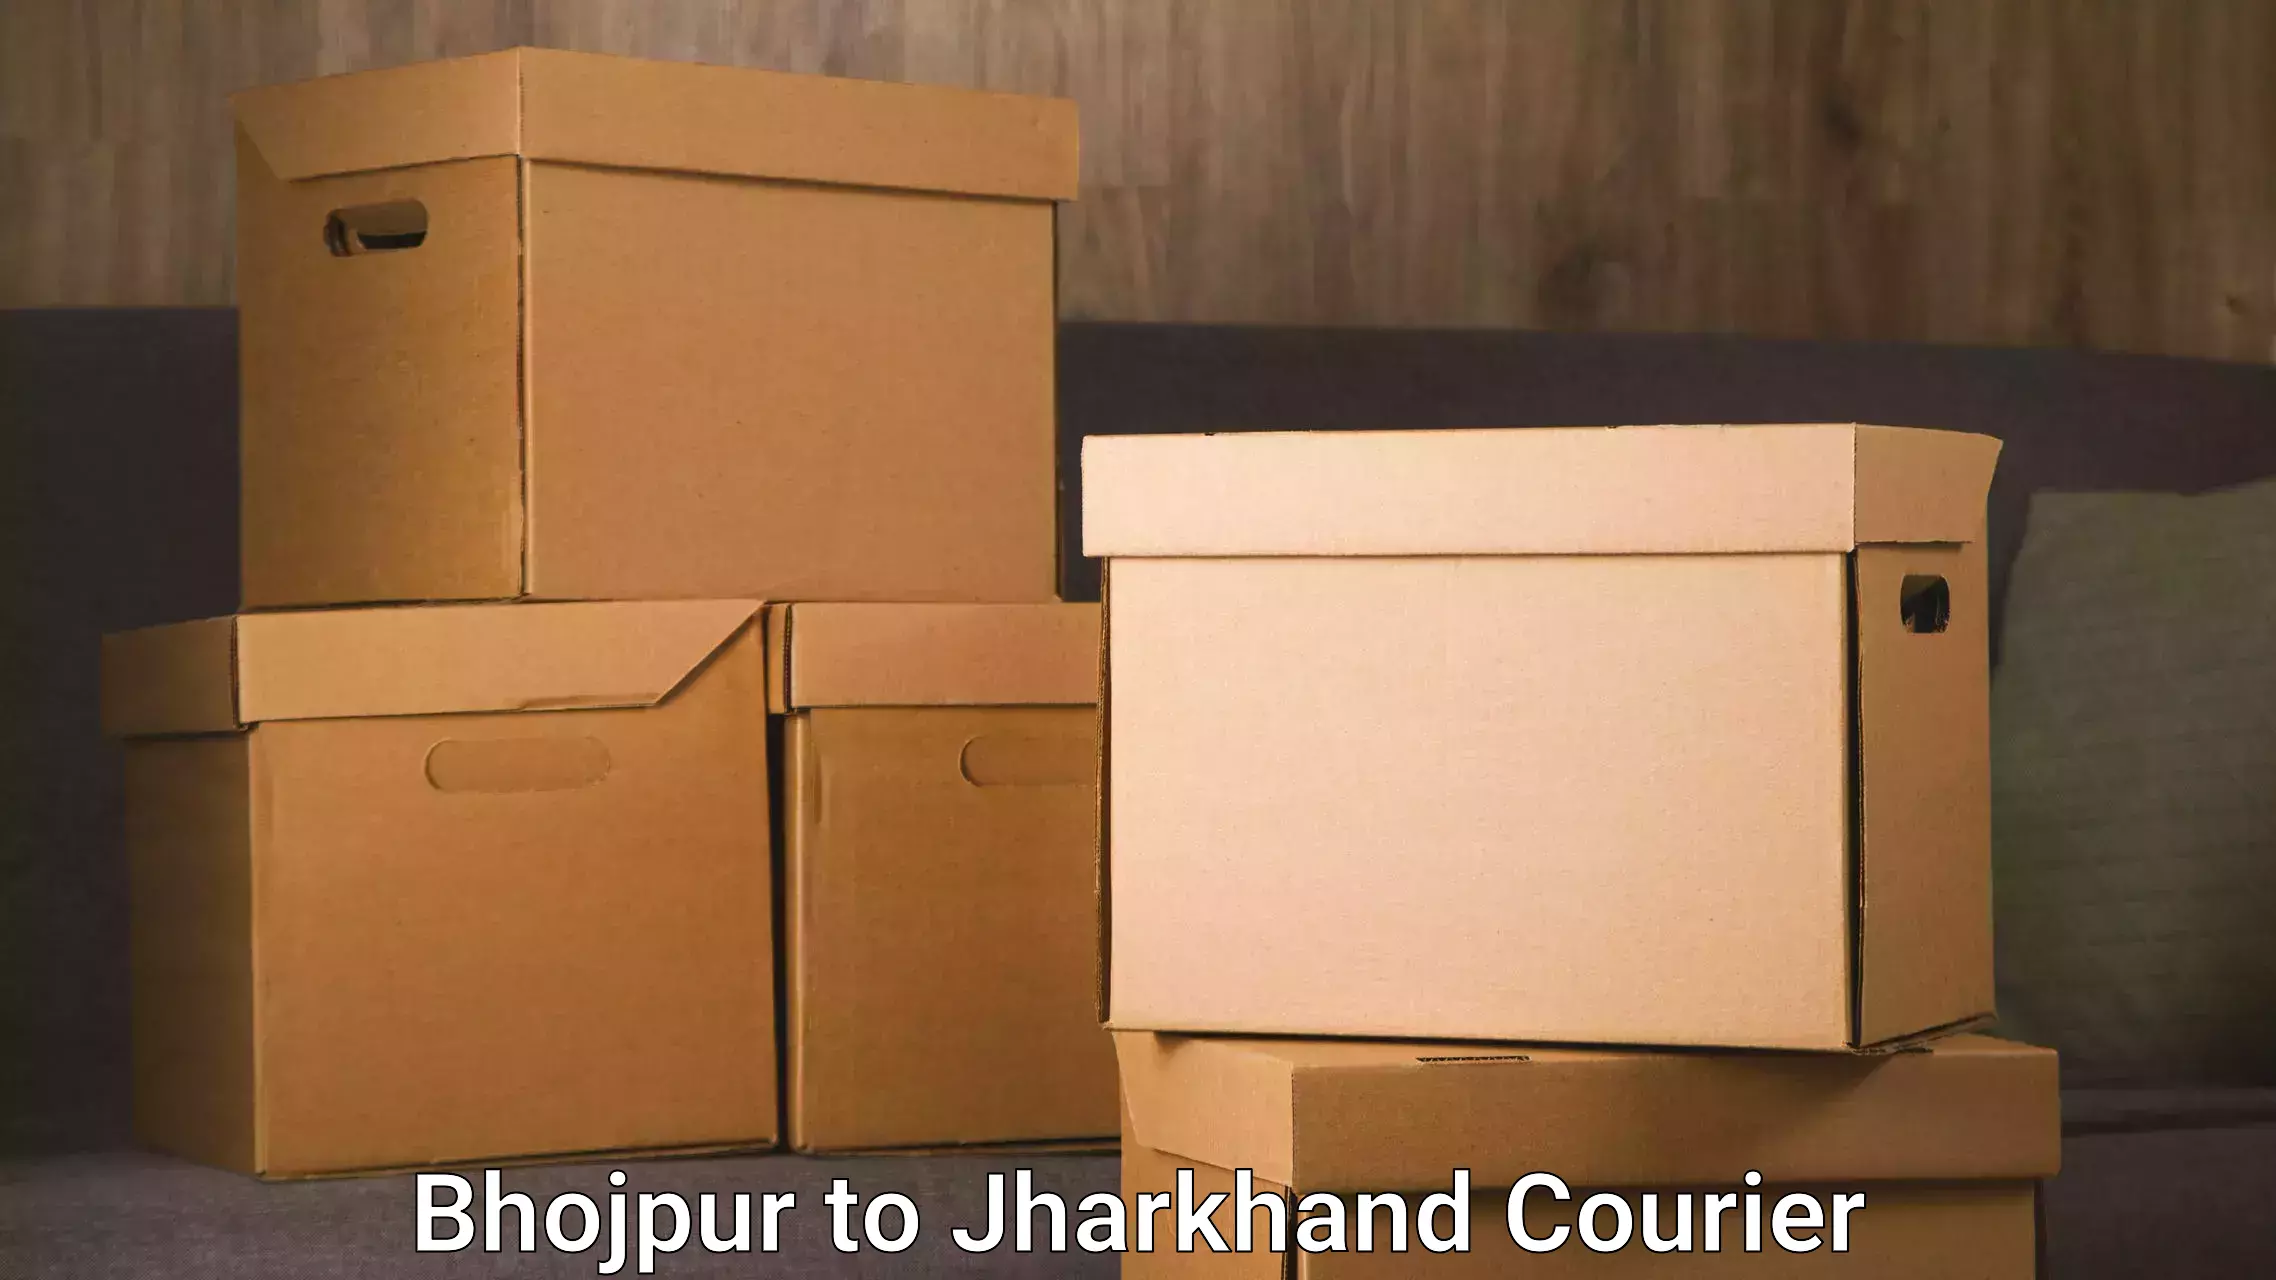 Furniture relocation experts Bhojpur to Jharkhand